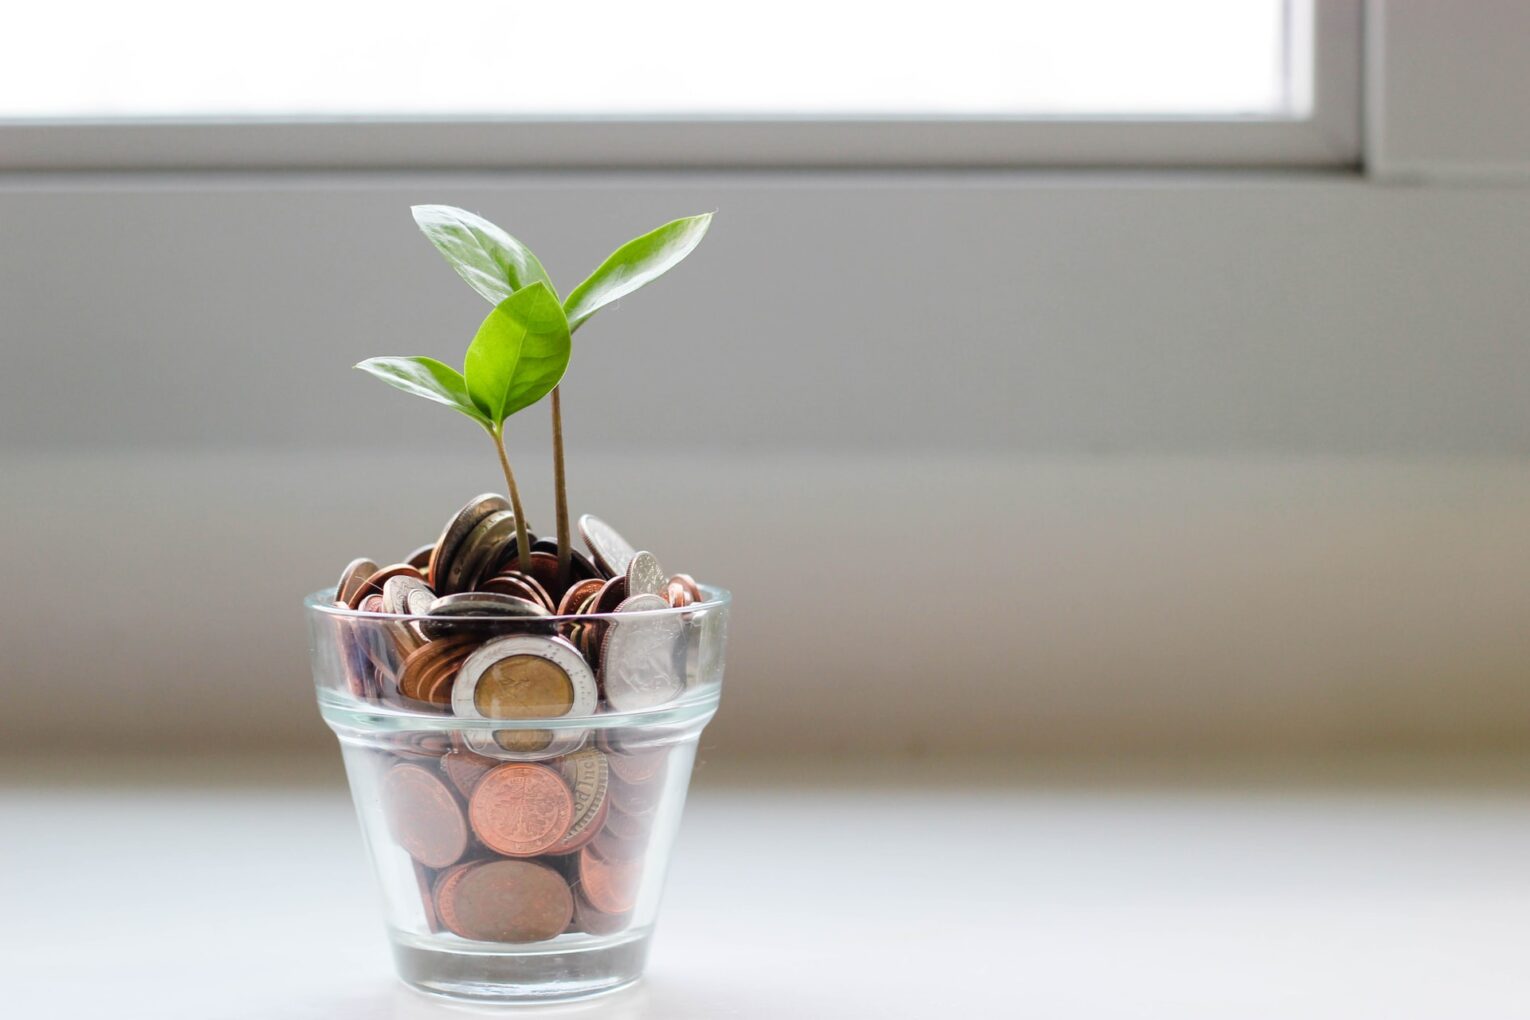 xA plant growing out of coins